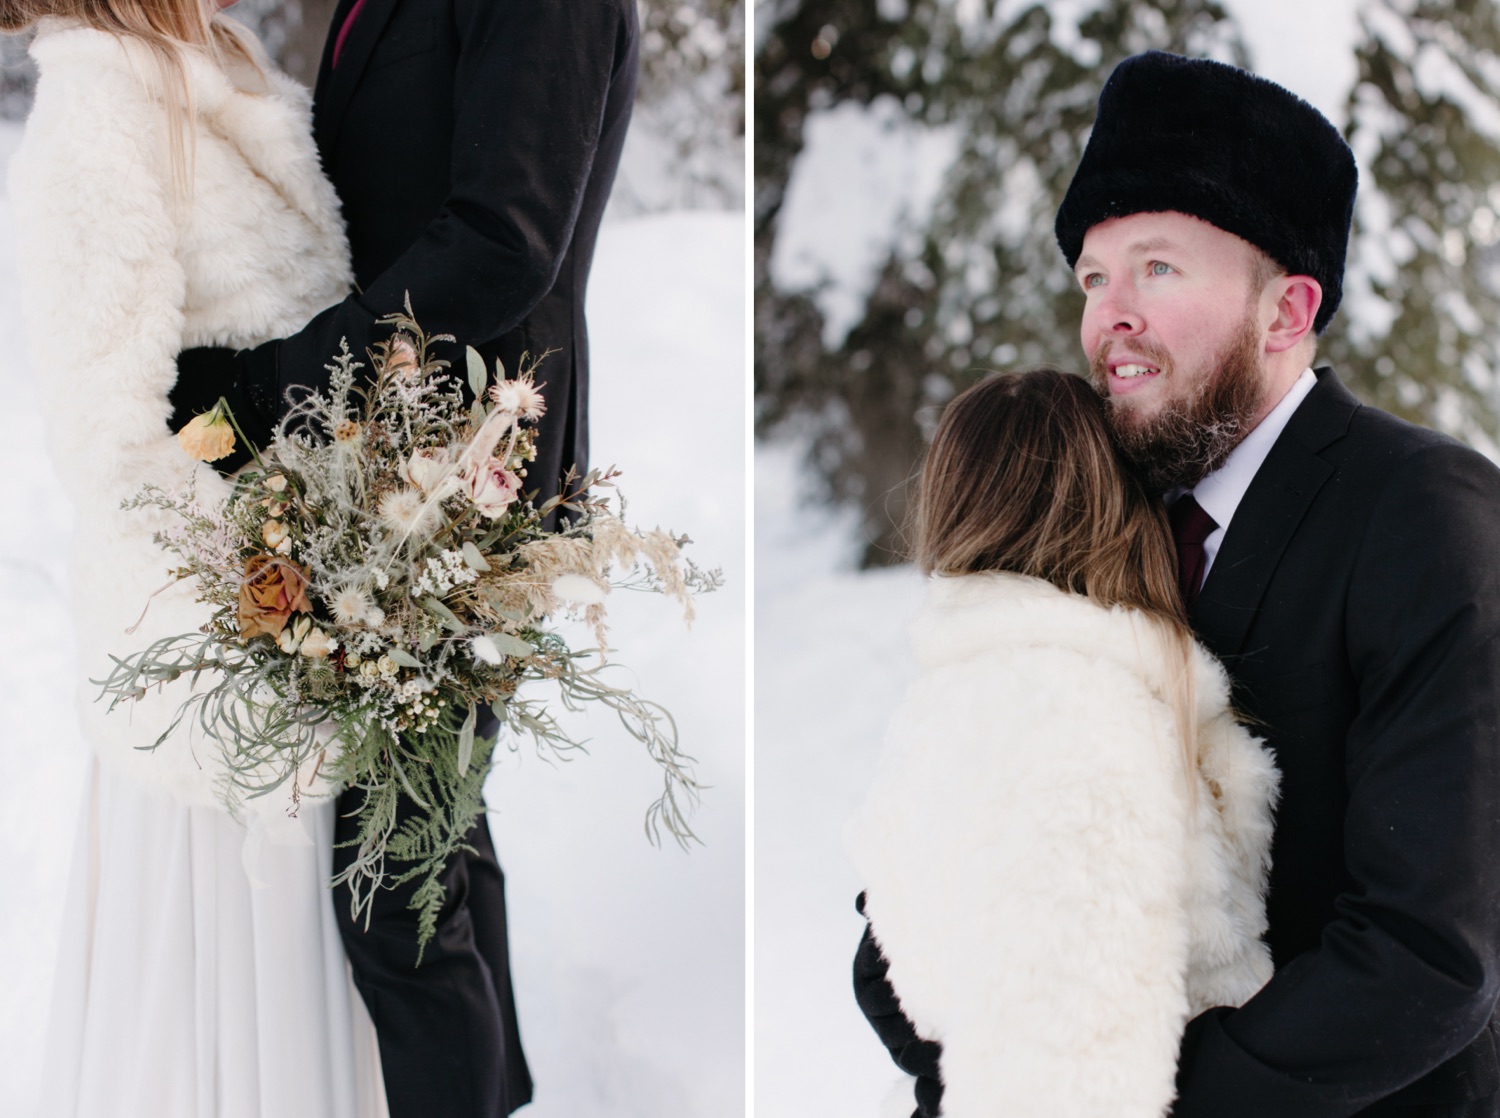 Dried floral bouquet and frozen moustache details for a Canadian wedding at Emerald Lake